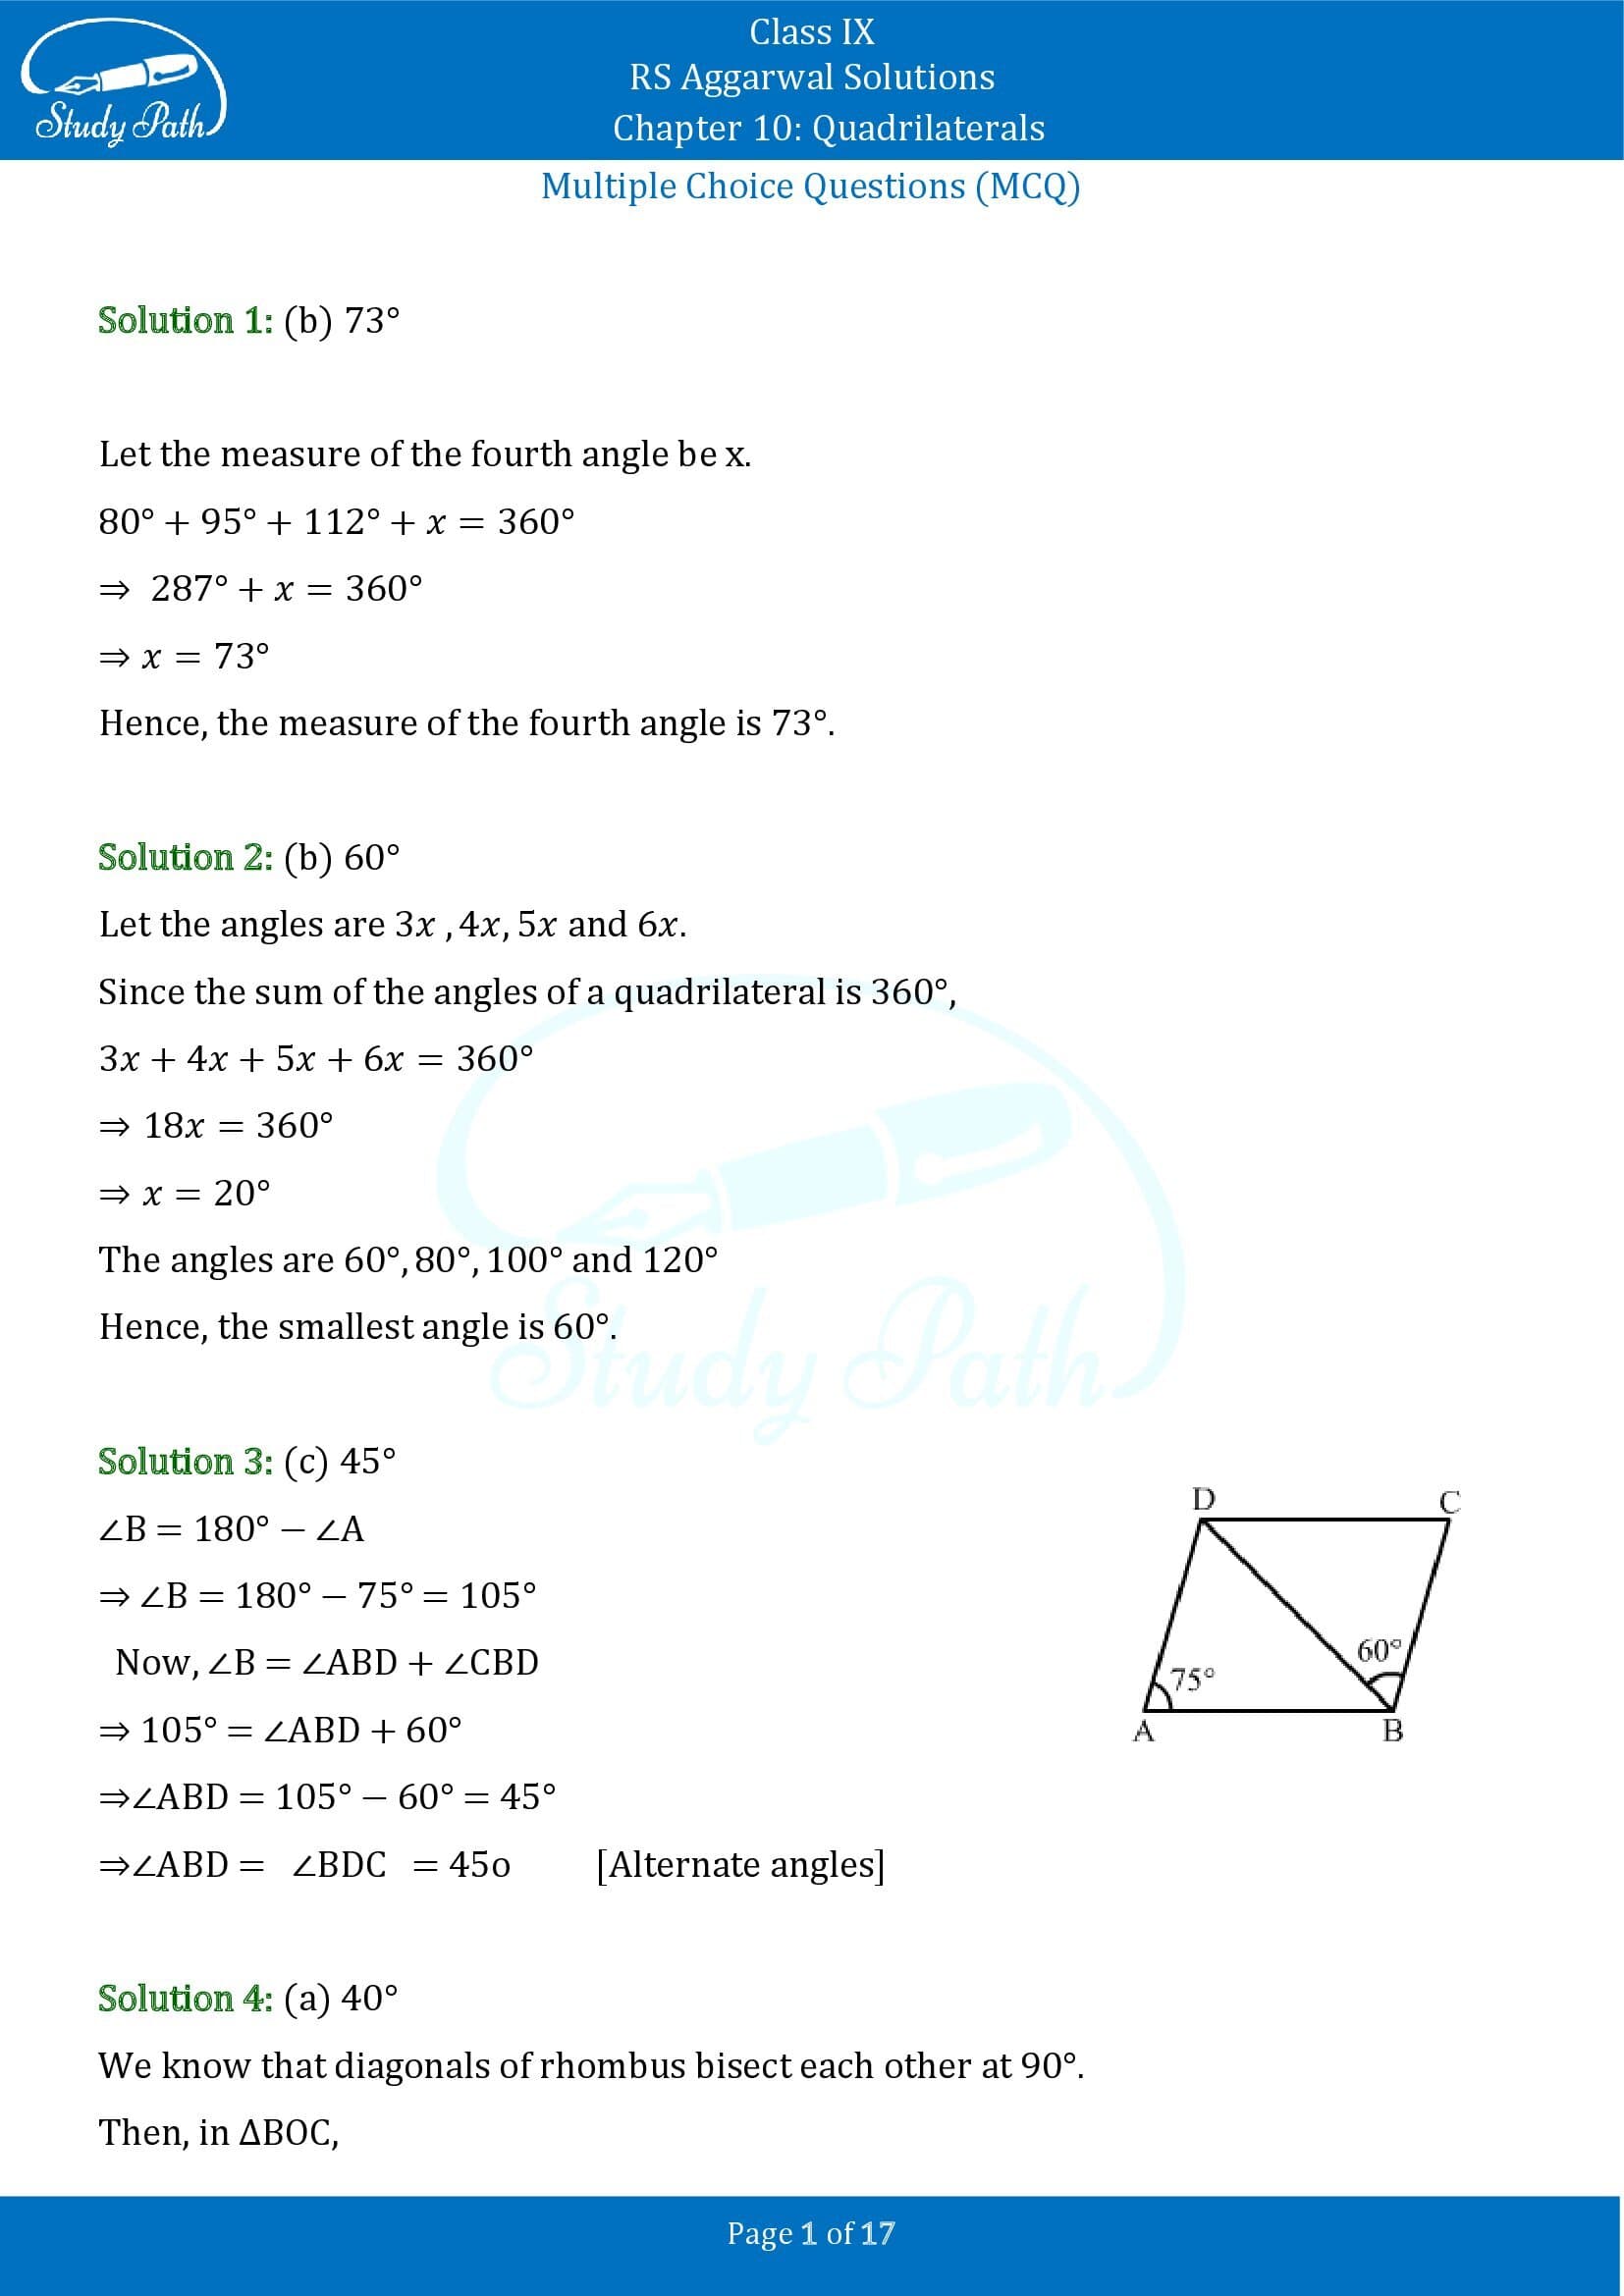 RS Aggarwal Solutions Class 9 Chapter 10 Quadrilaterals Multiple Choice Questions MCQs 00001